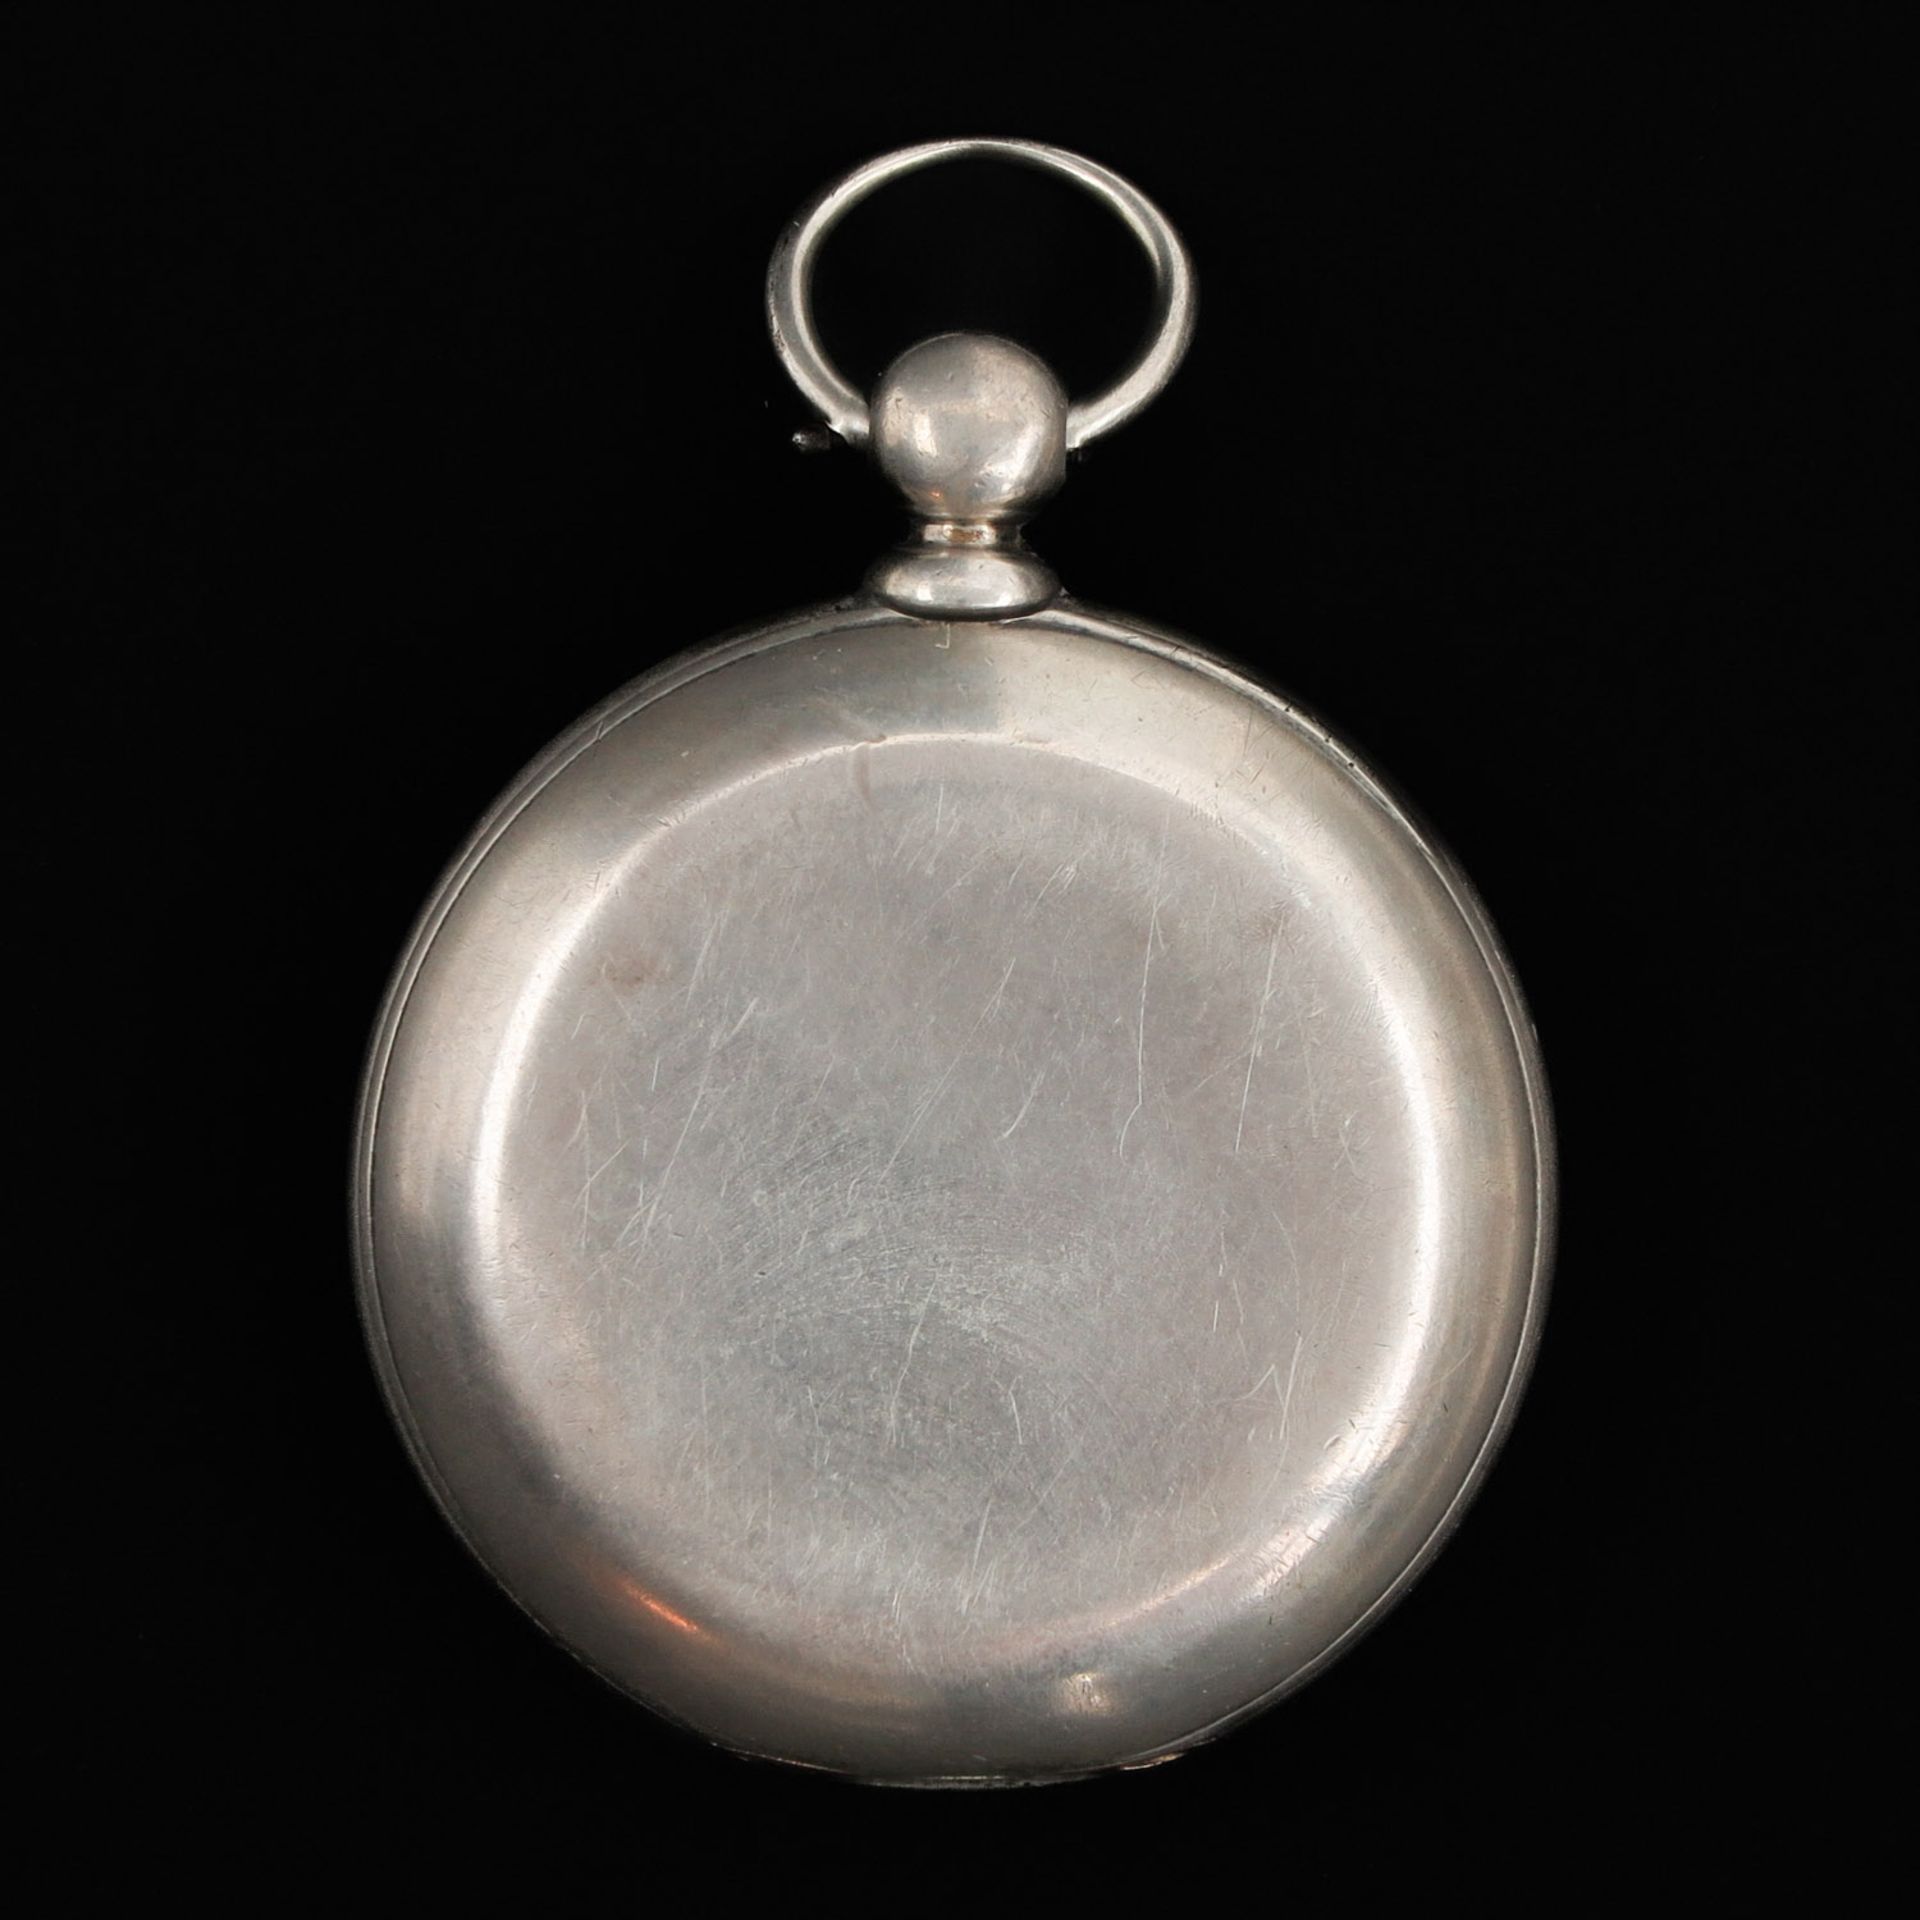 A James Nardin Locle Pocket Watch - Image 2 of 7